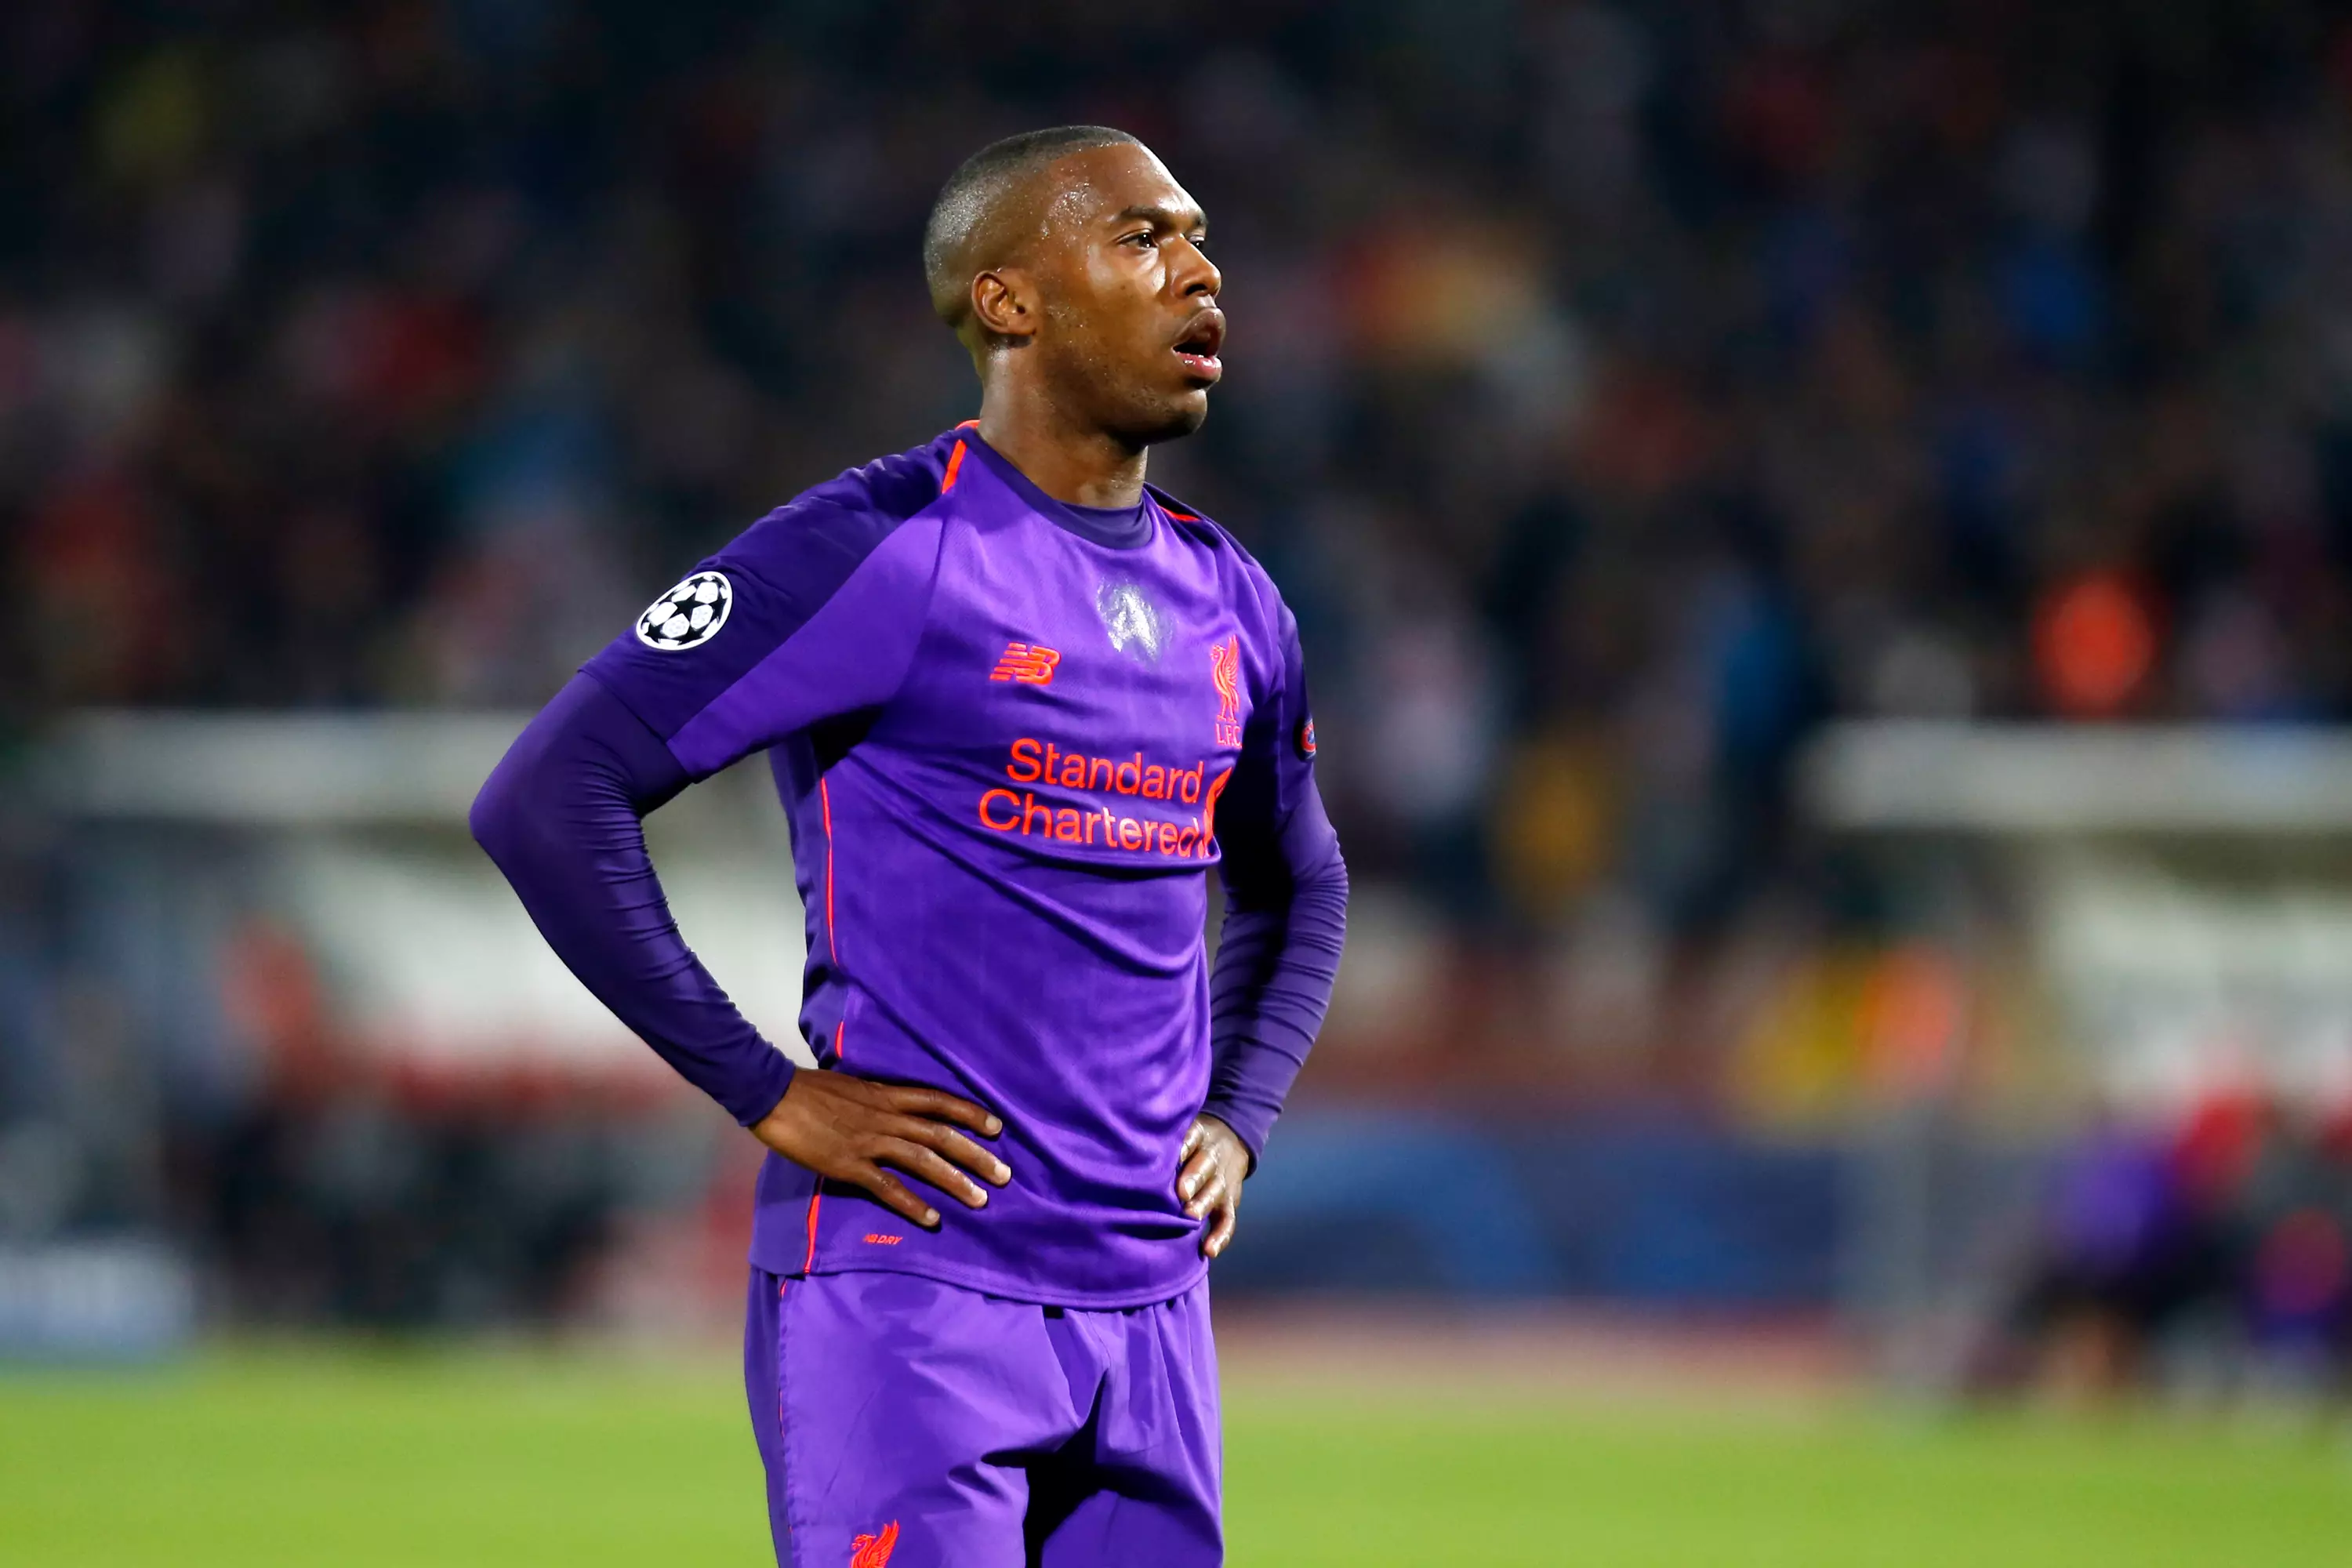 FA Charges Daniel Sturridge With Misconduct Over Betting Rules